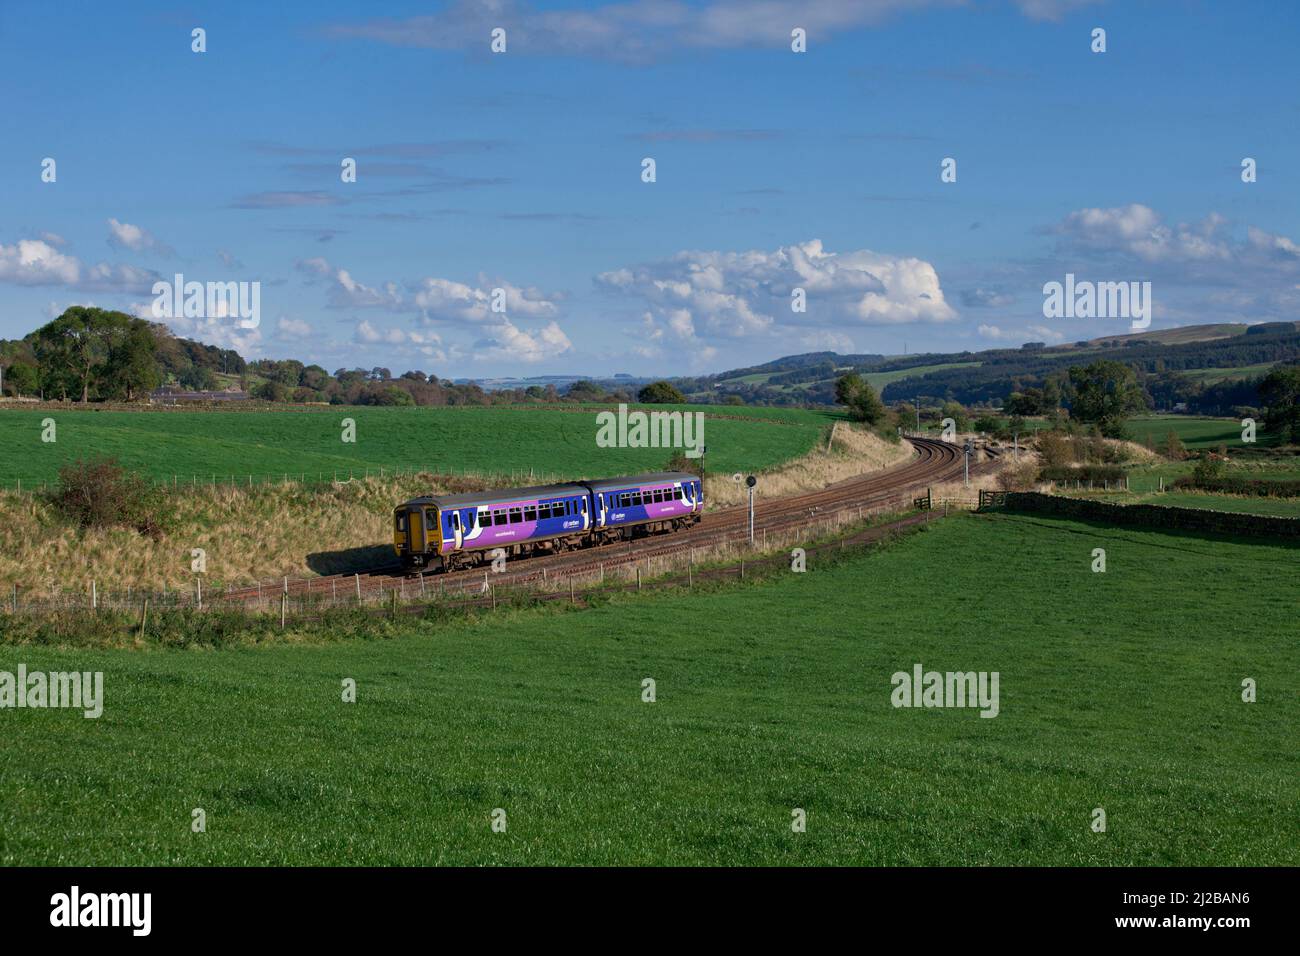 Northern rail class 156 sprinter train passing Whitchester on the scenic Tyne valley railway line Stock Photo